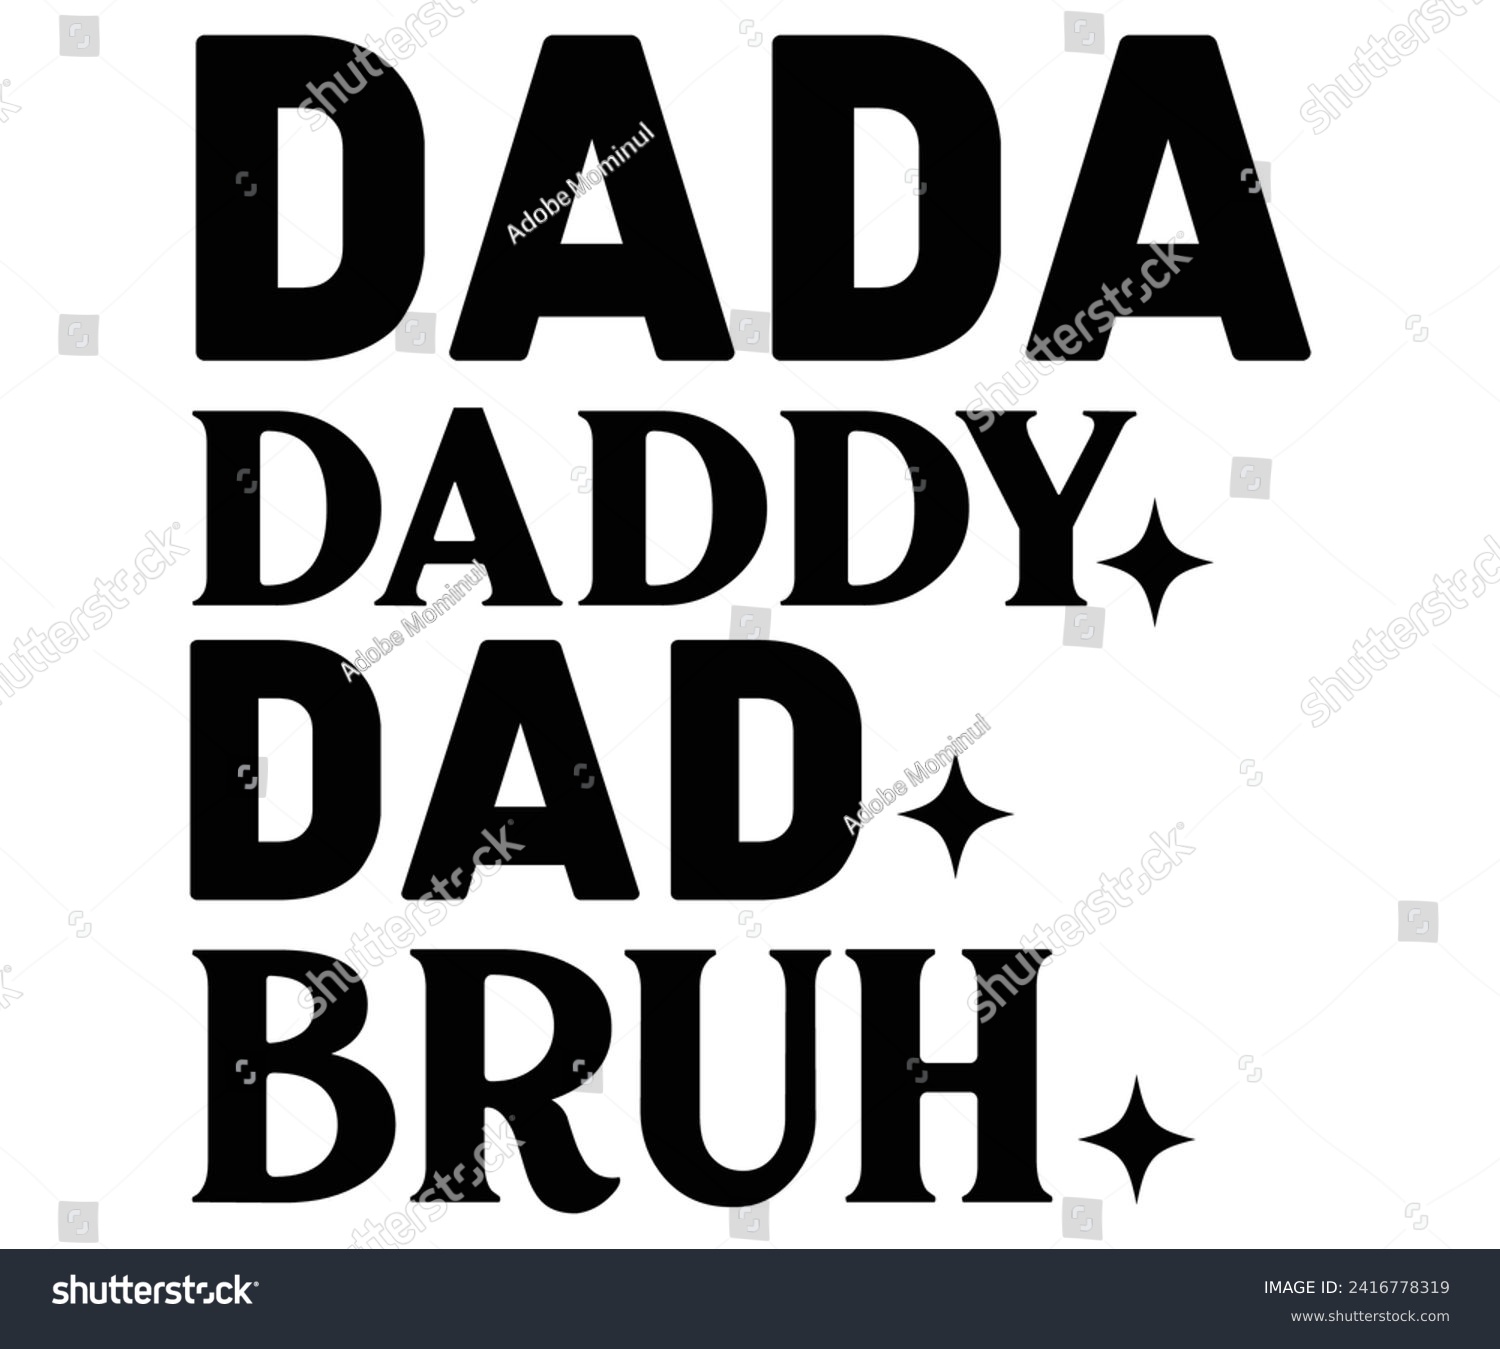 SVG of Dada Daddy Dad Bruh Svg,Father's Day Svg,Papa svg,Grandpa Svg,Father's Day Saying Qoutes,Dad Svg,Funny Father, Gift For Dad Svg,Daddy Svg,Family Svg,T shirt Design,Svg Cut File,Typography svg